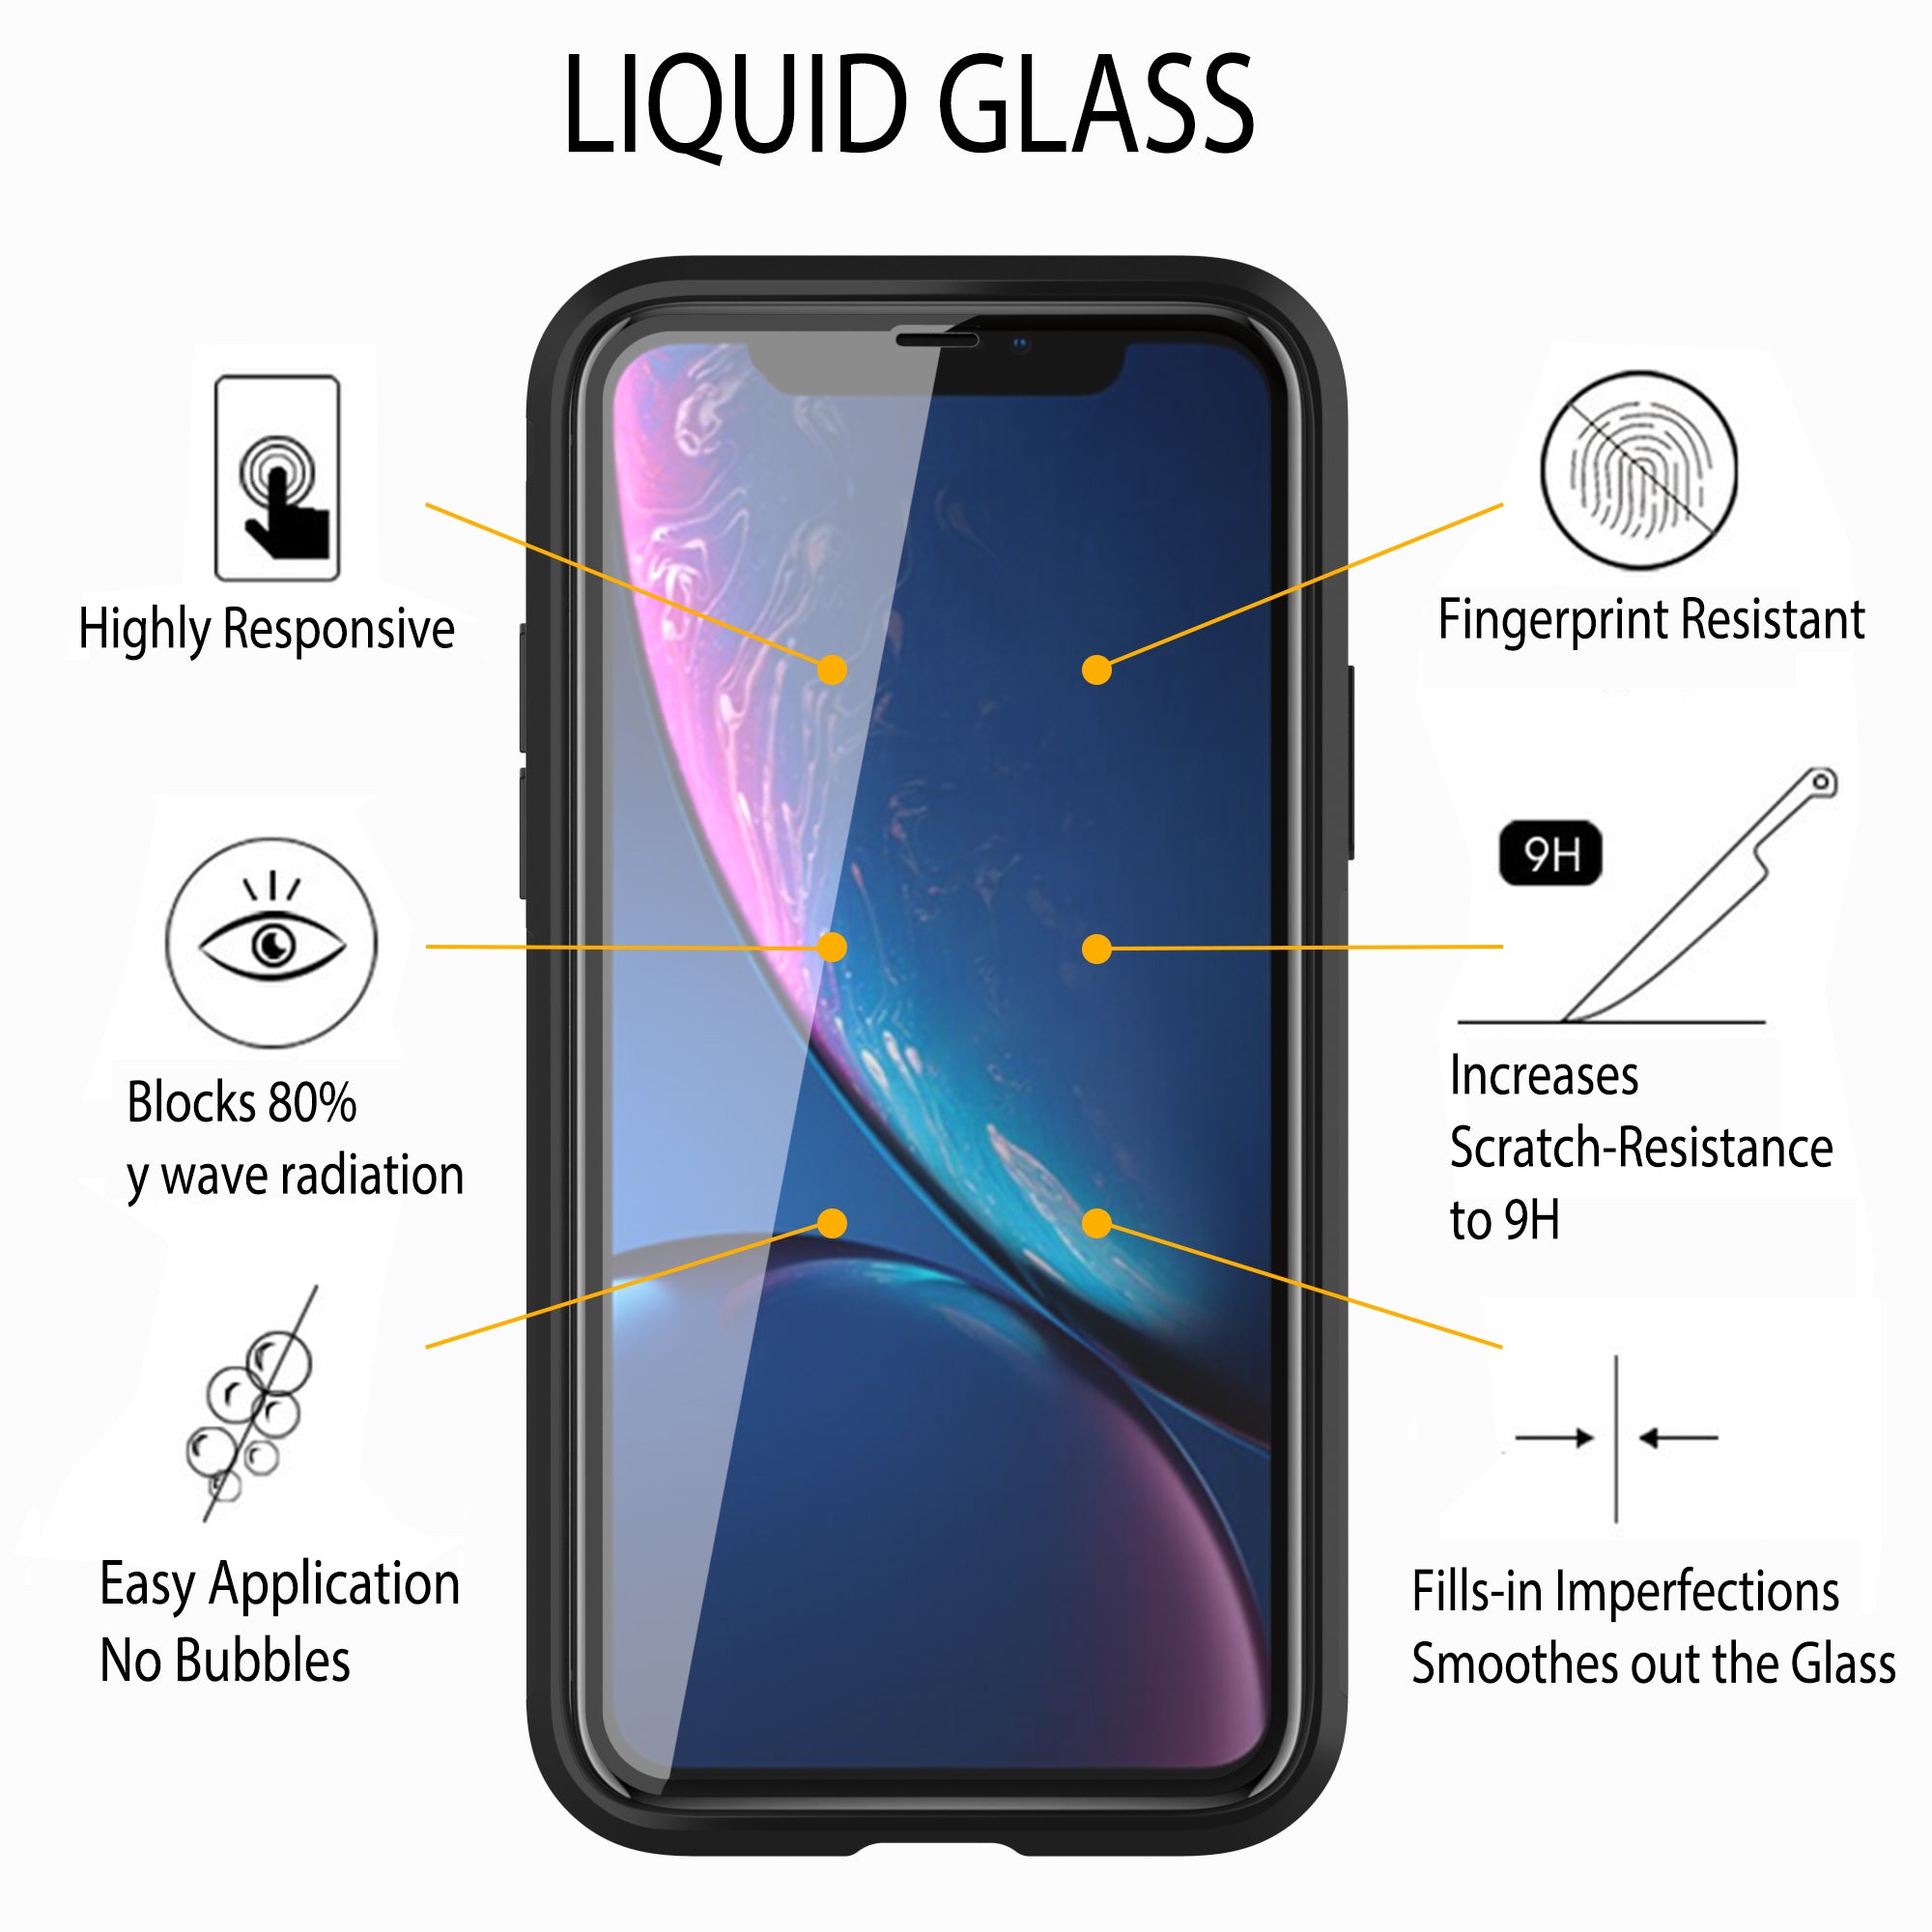 Liquid Glass Screen Protector with $250 Screen Protection Guarantee - Universal